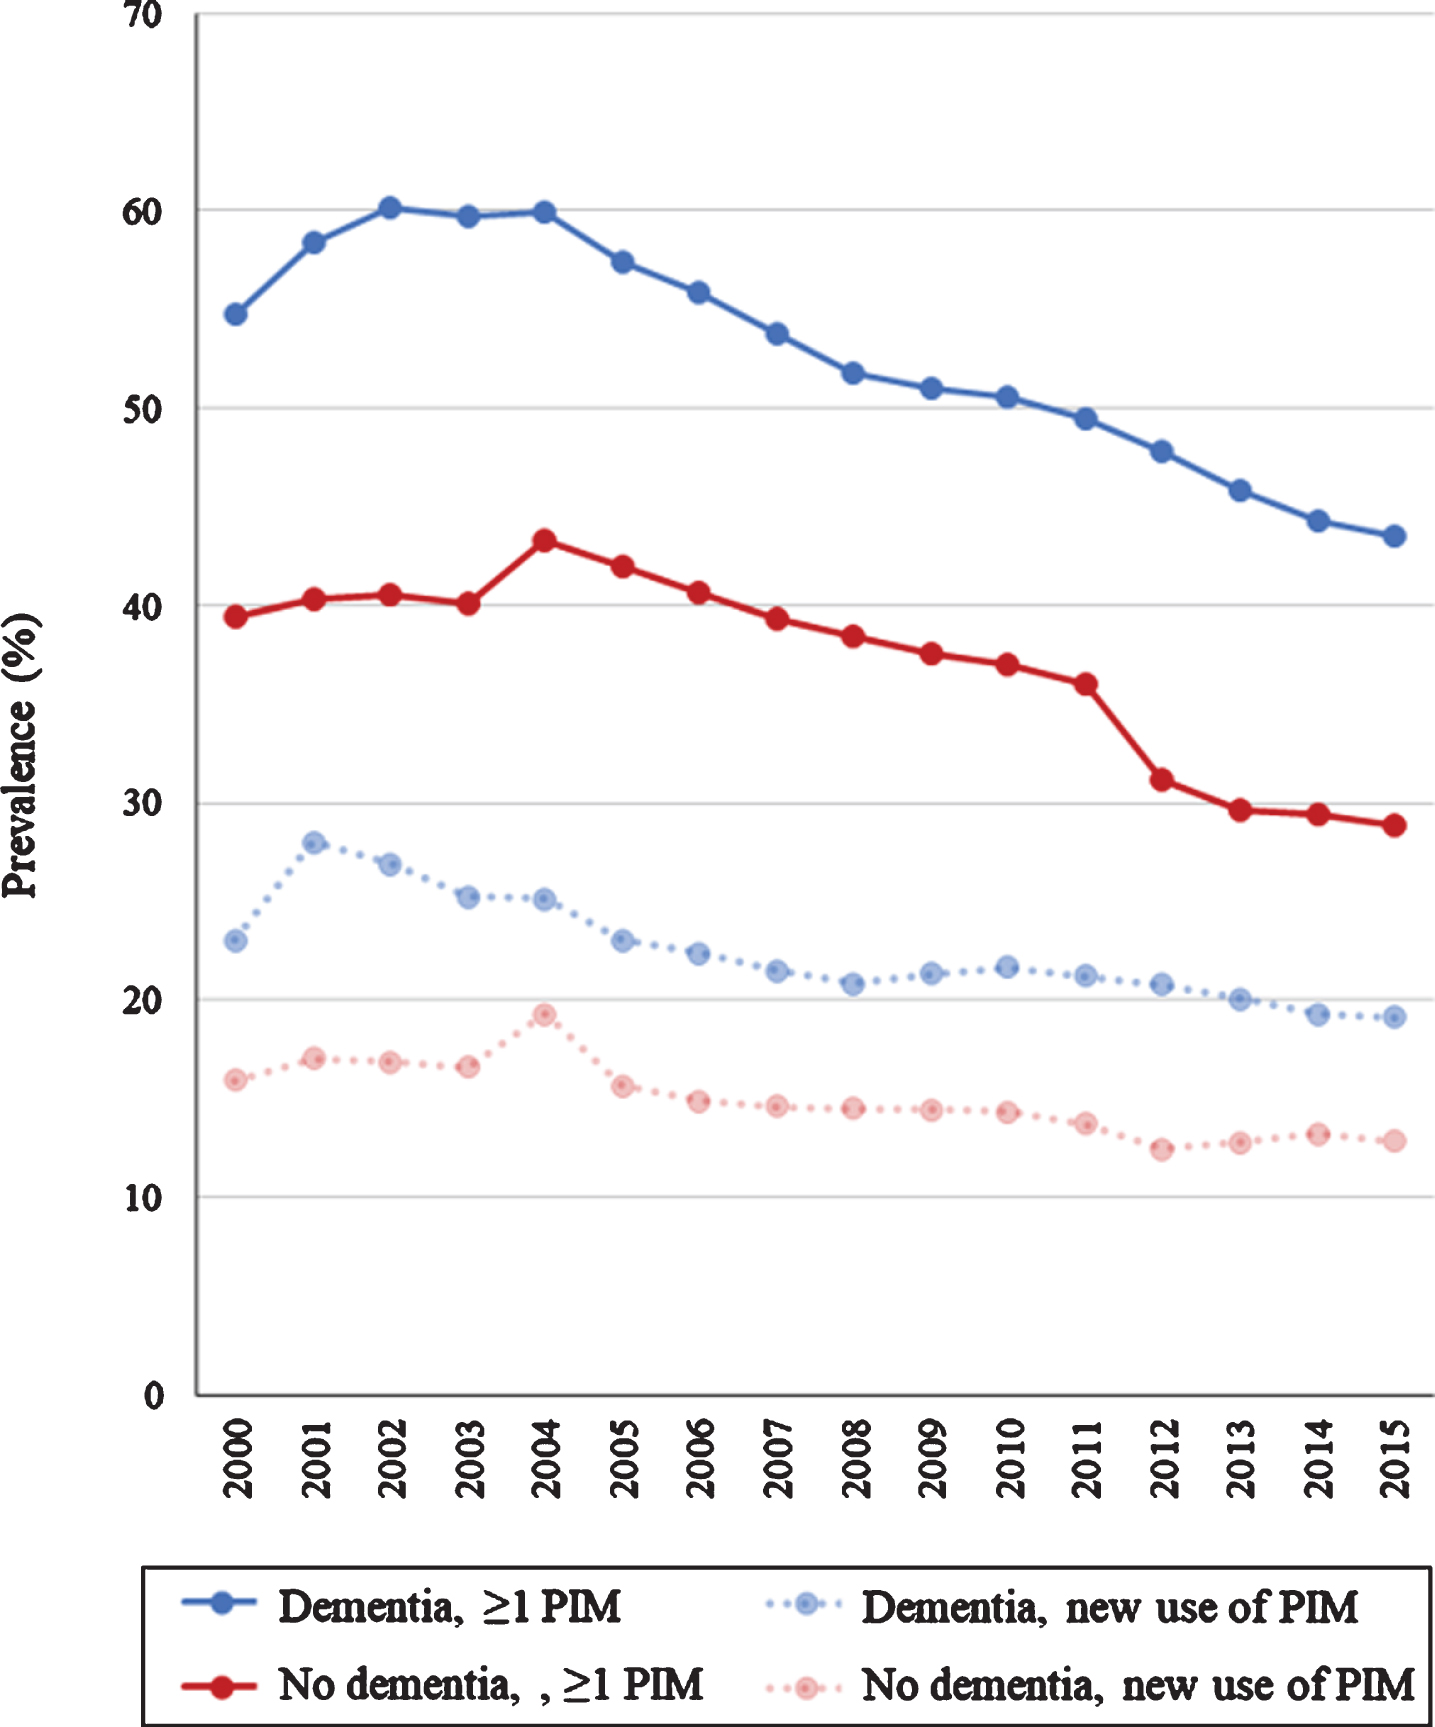 Prevalence of potentially inappropriate medication (PIM), defined as the red category of the red-yellow-green list, in older people with dementia (blue line) and without dementia (red line) from 2000 to 2015. And the prevalence of new use of PIM in people with dementia (dashed transparent blue line) and without dementia (dashed transparent red line) from 2000 to 2015.